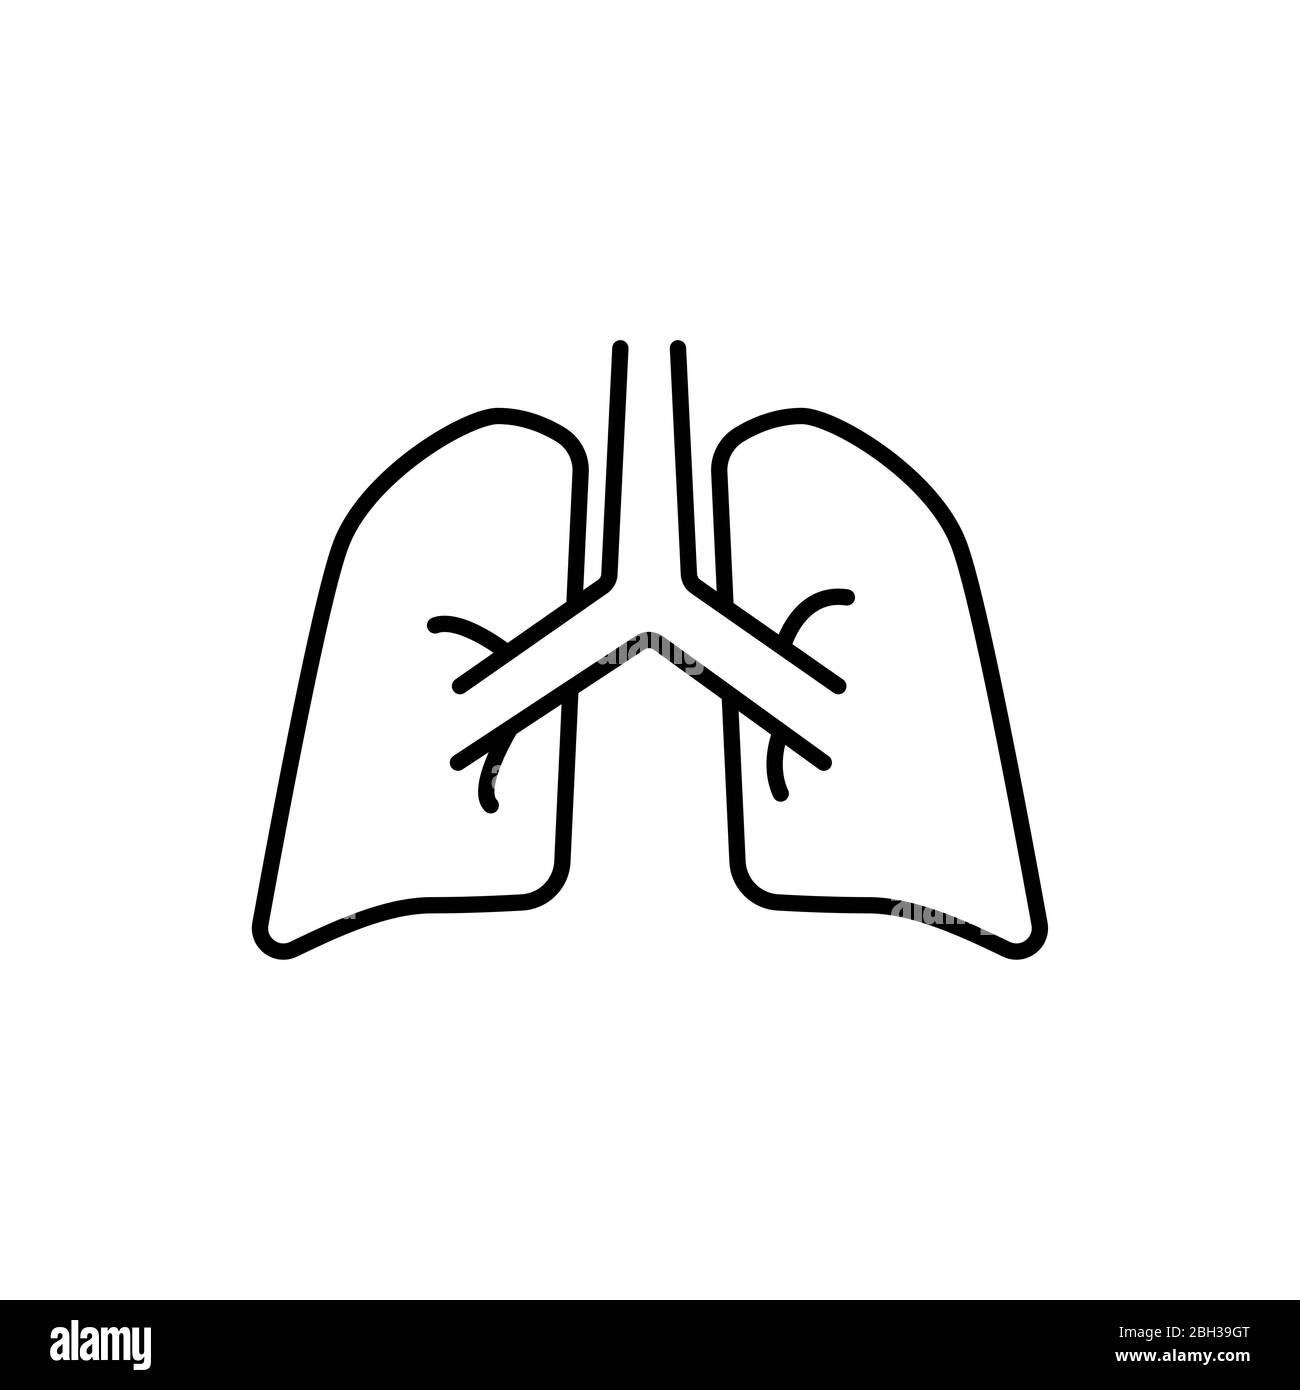 Human lungs sign. Simple line vector icon. Internal human organ. Stock Photo